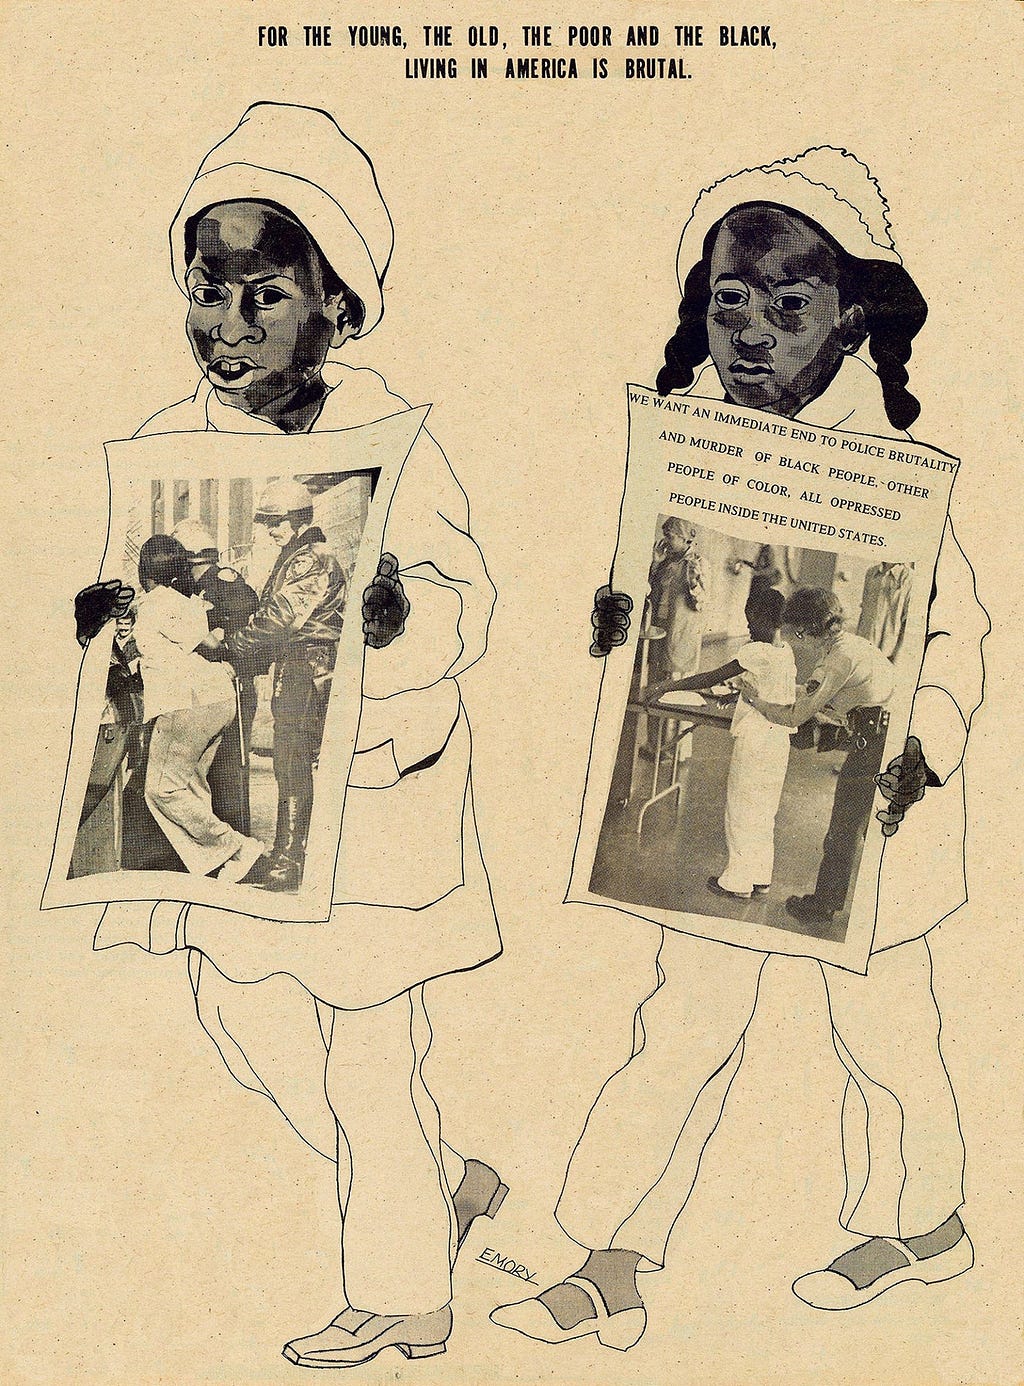 A drawing by Emory Douglas showing children demanding an end to police brutality